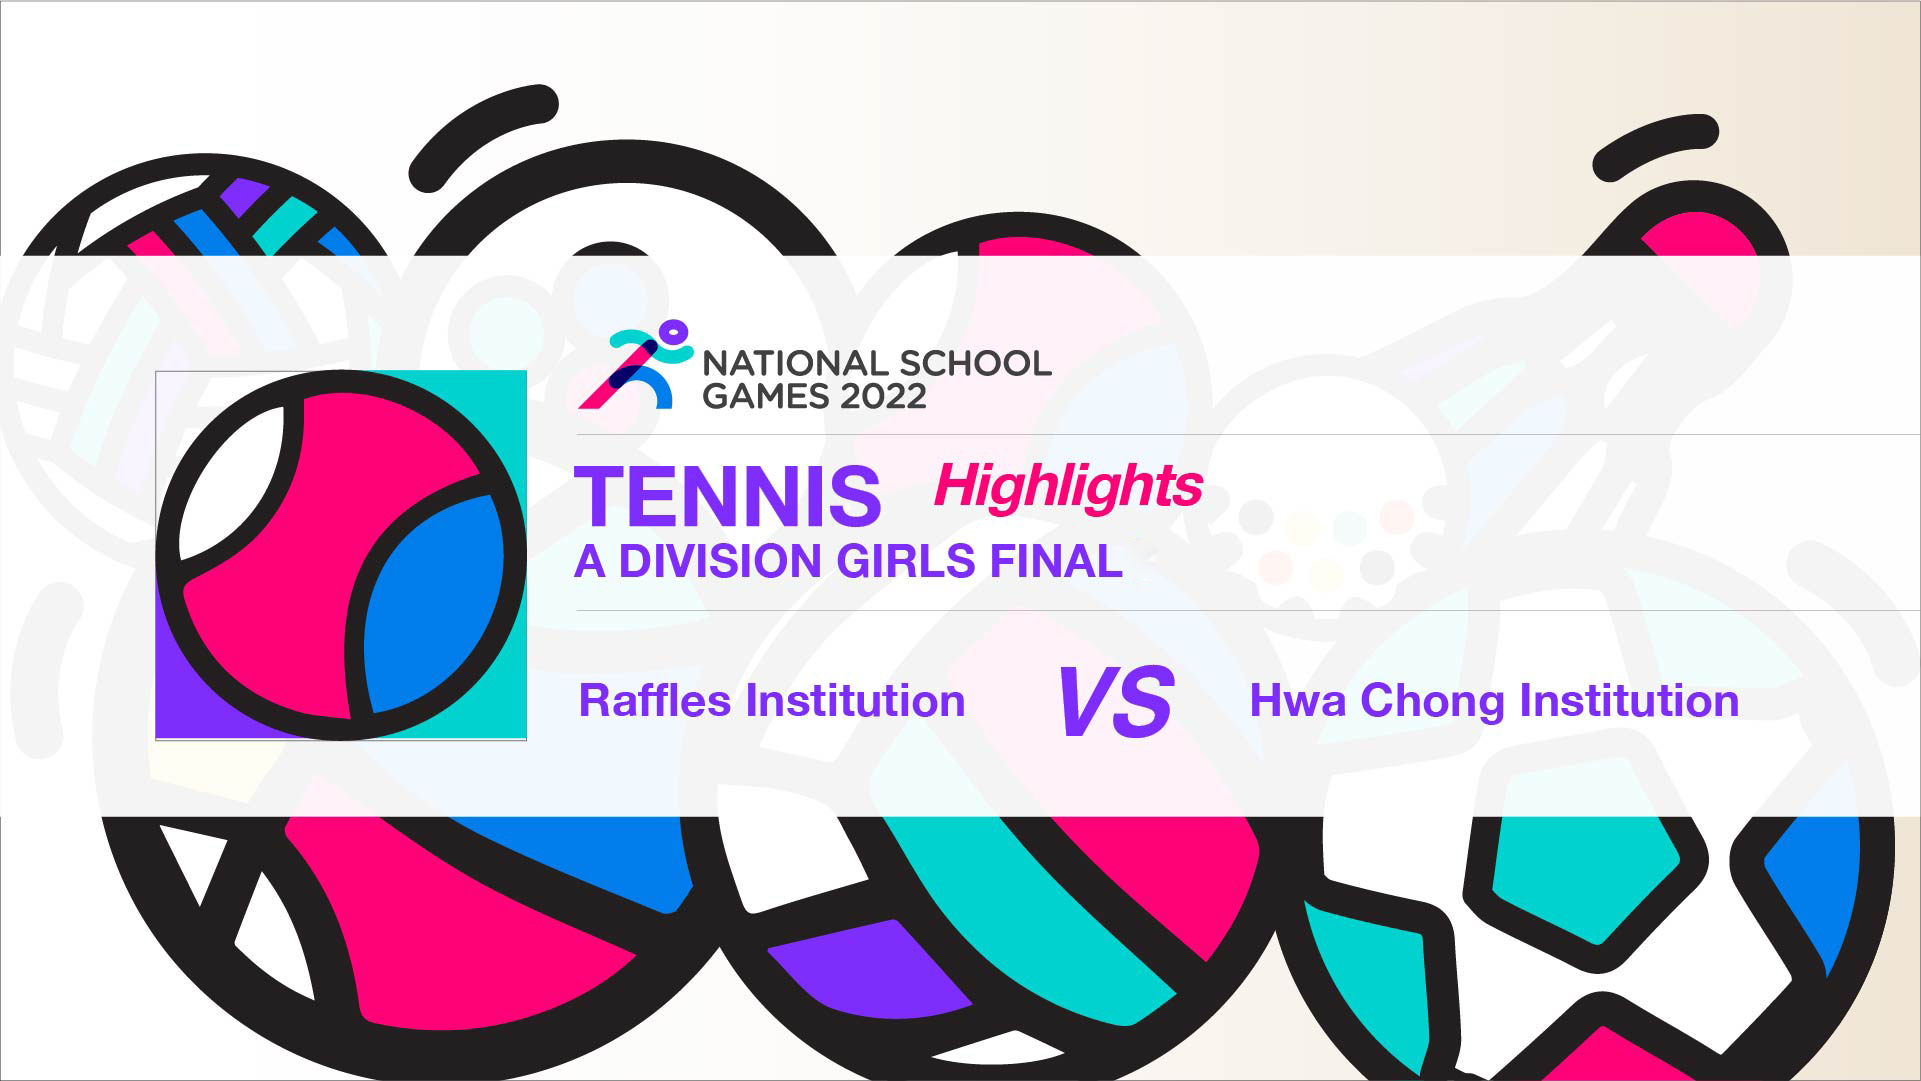 SSSC Tennis National A Division Girls Final | Raffles Institution vs Hwa Chong Institution - Highlights